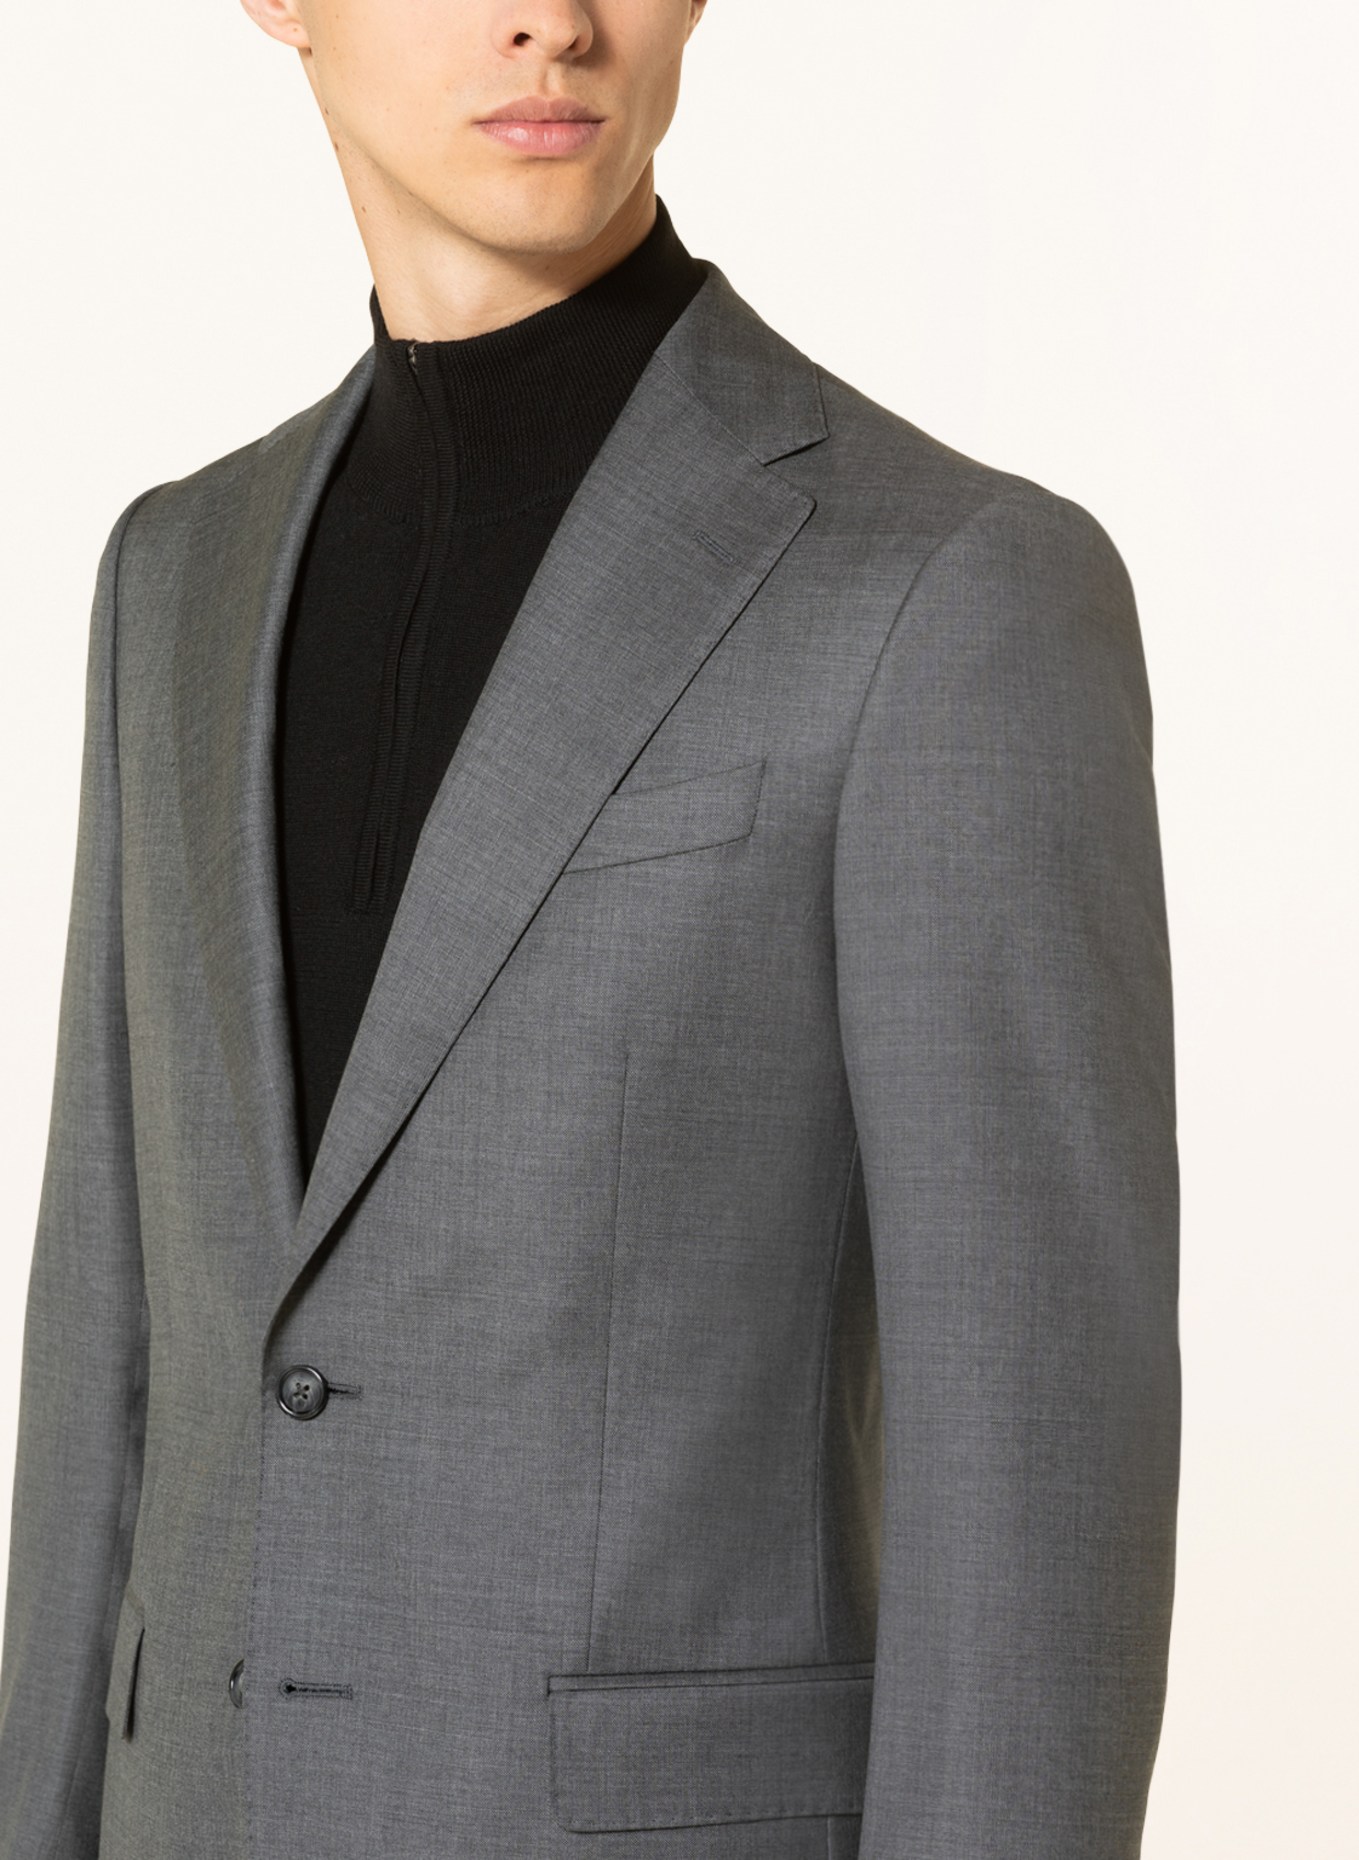 CHAS Suit jacket extra slim fit, Color: 1/74 Light Grey (Image 5)